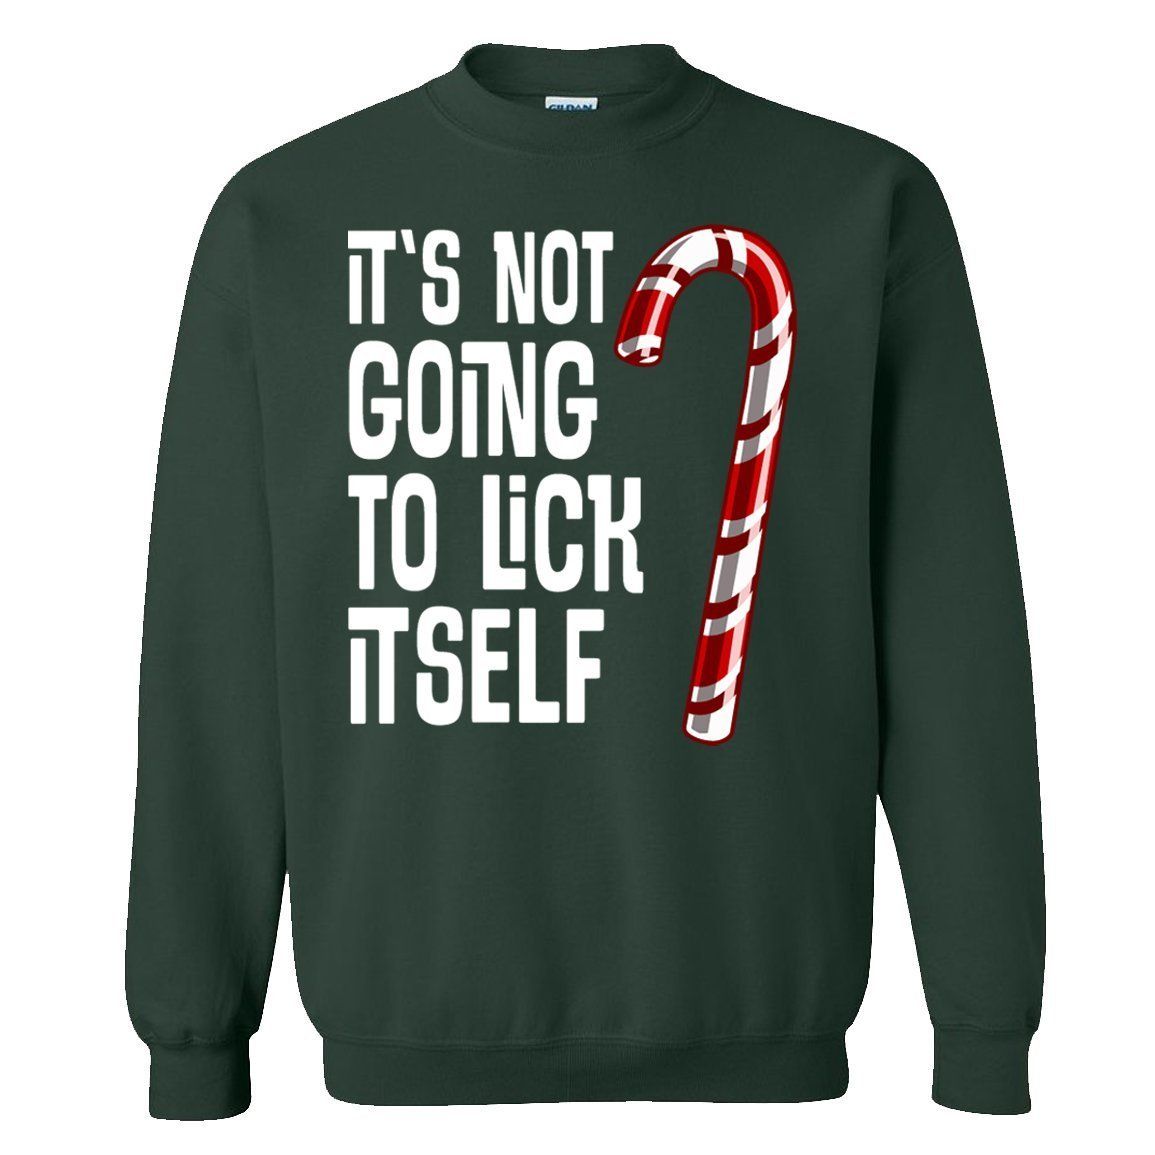 17 Christmas Sweaters - Inappropriate (But Funny!) Sweaters